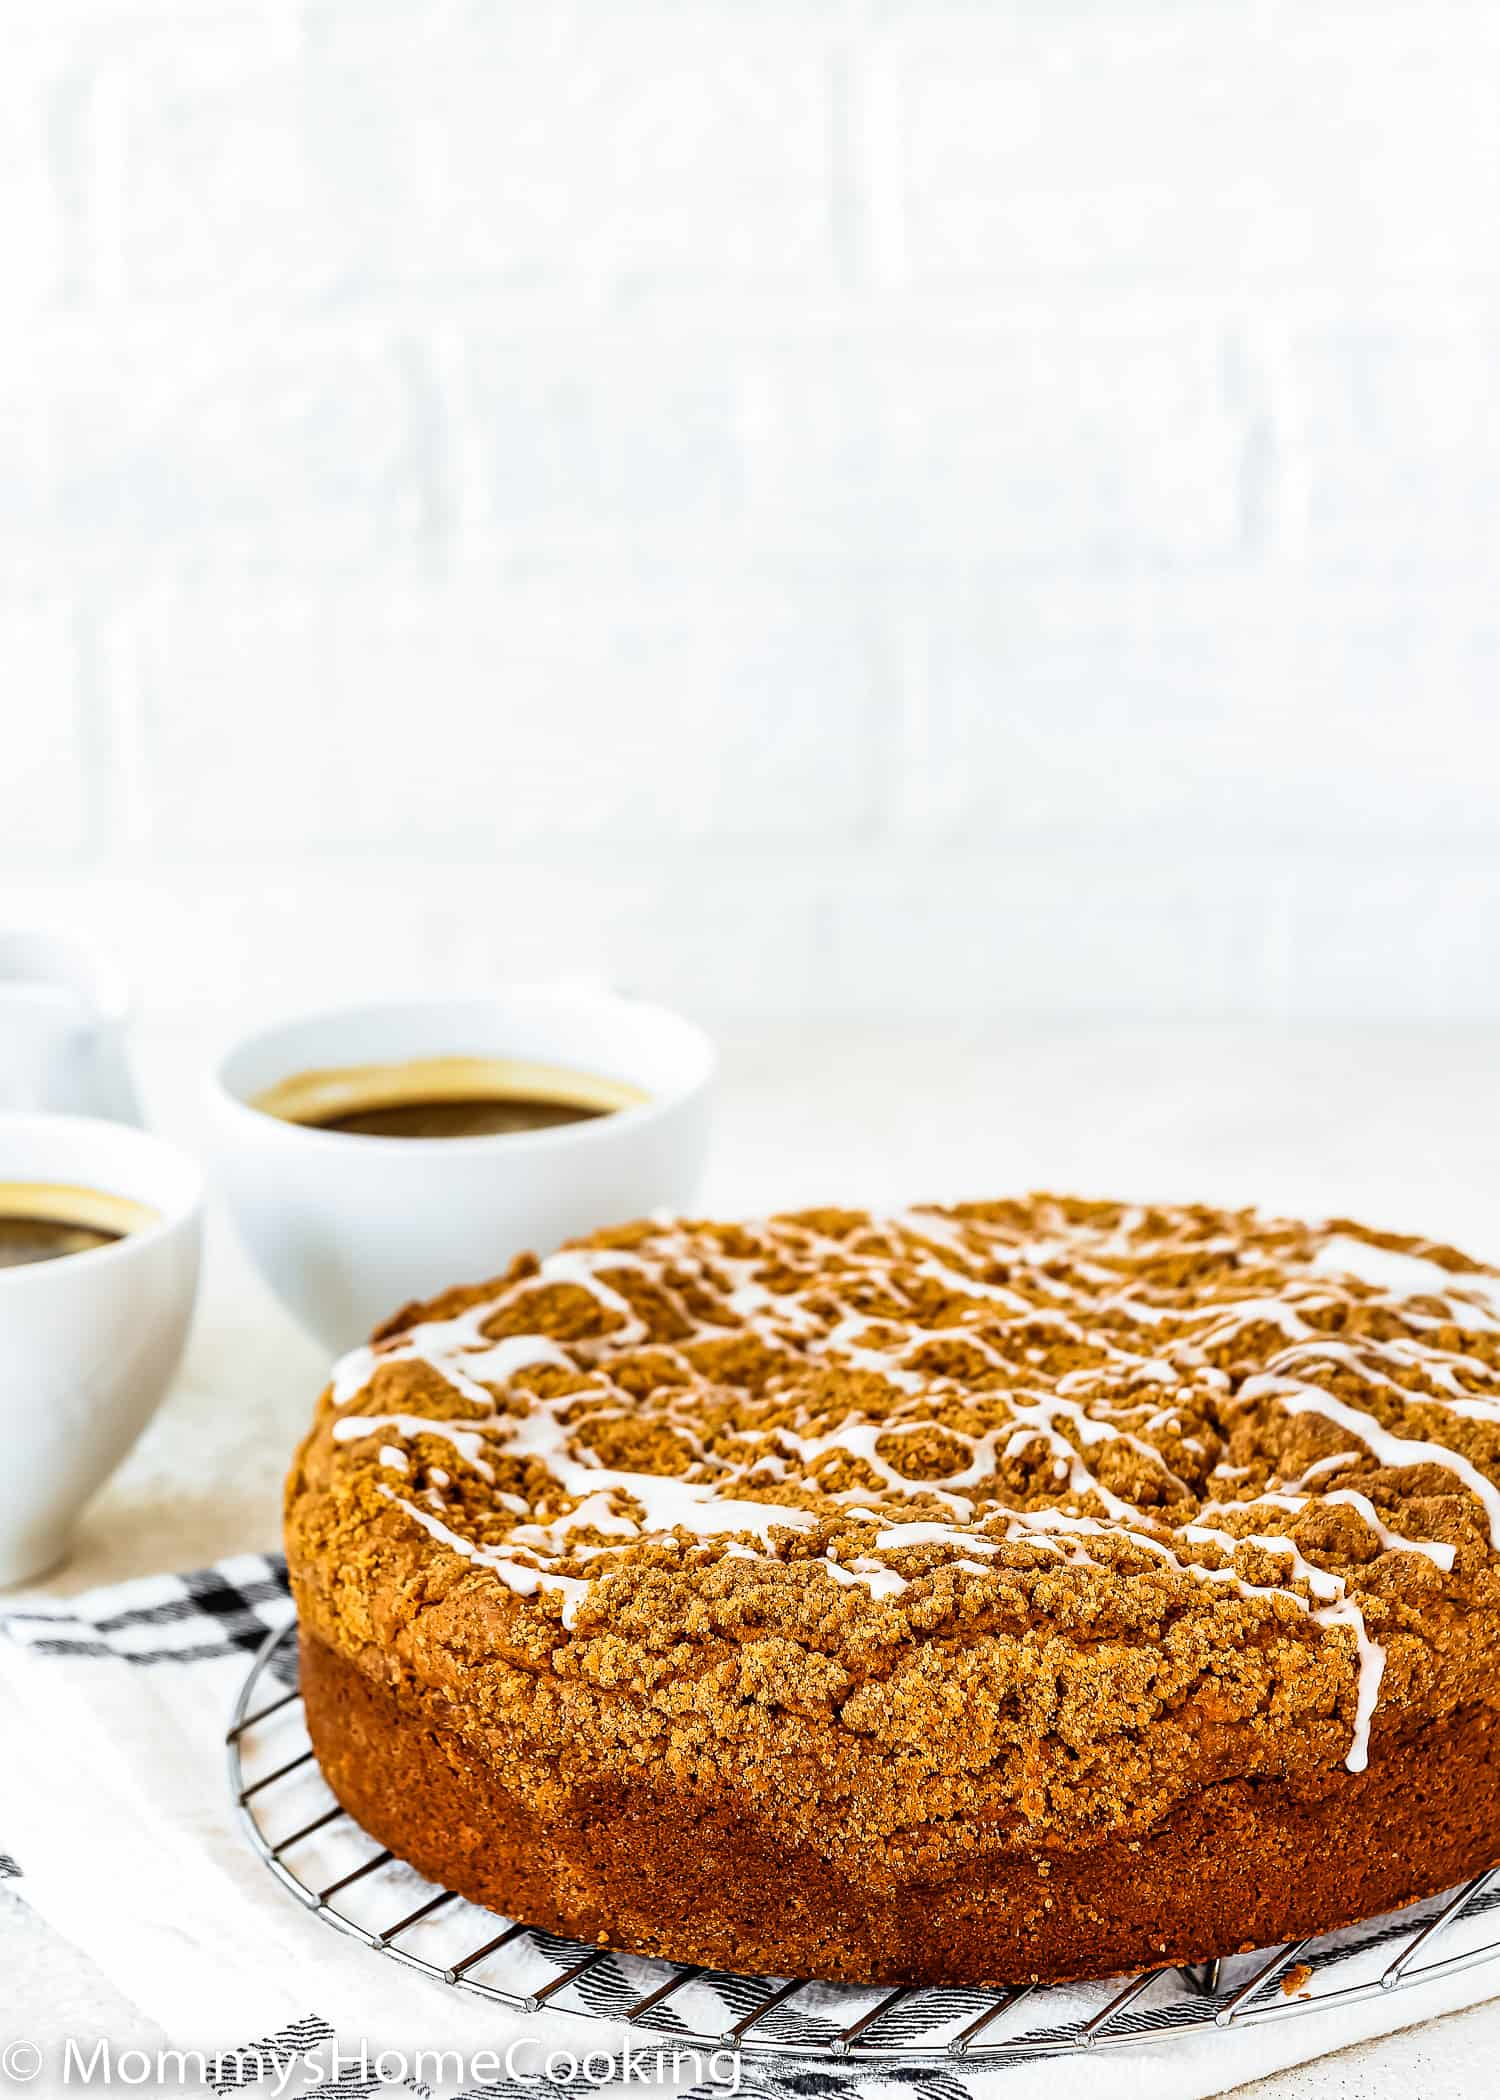 An Eggless Coffee Cake with streusel and glaze on top over a cooling rack with two cup of coffee on the background.